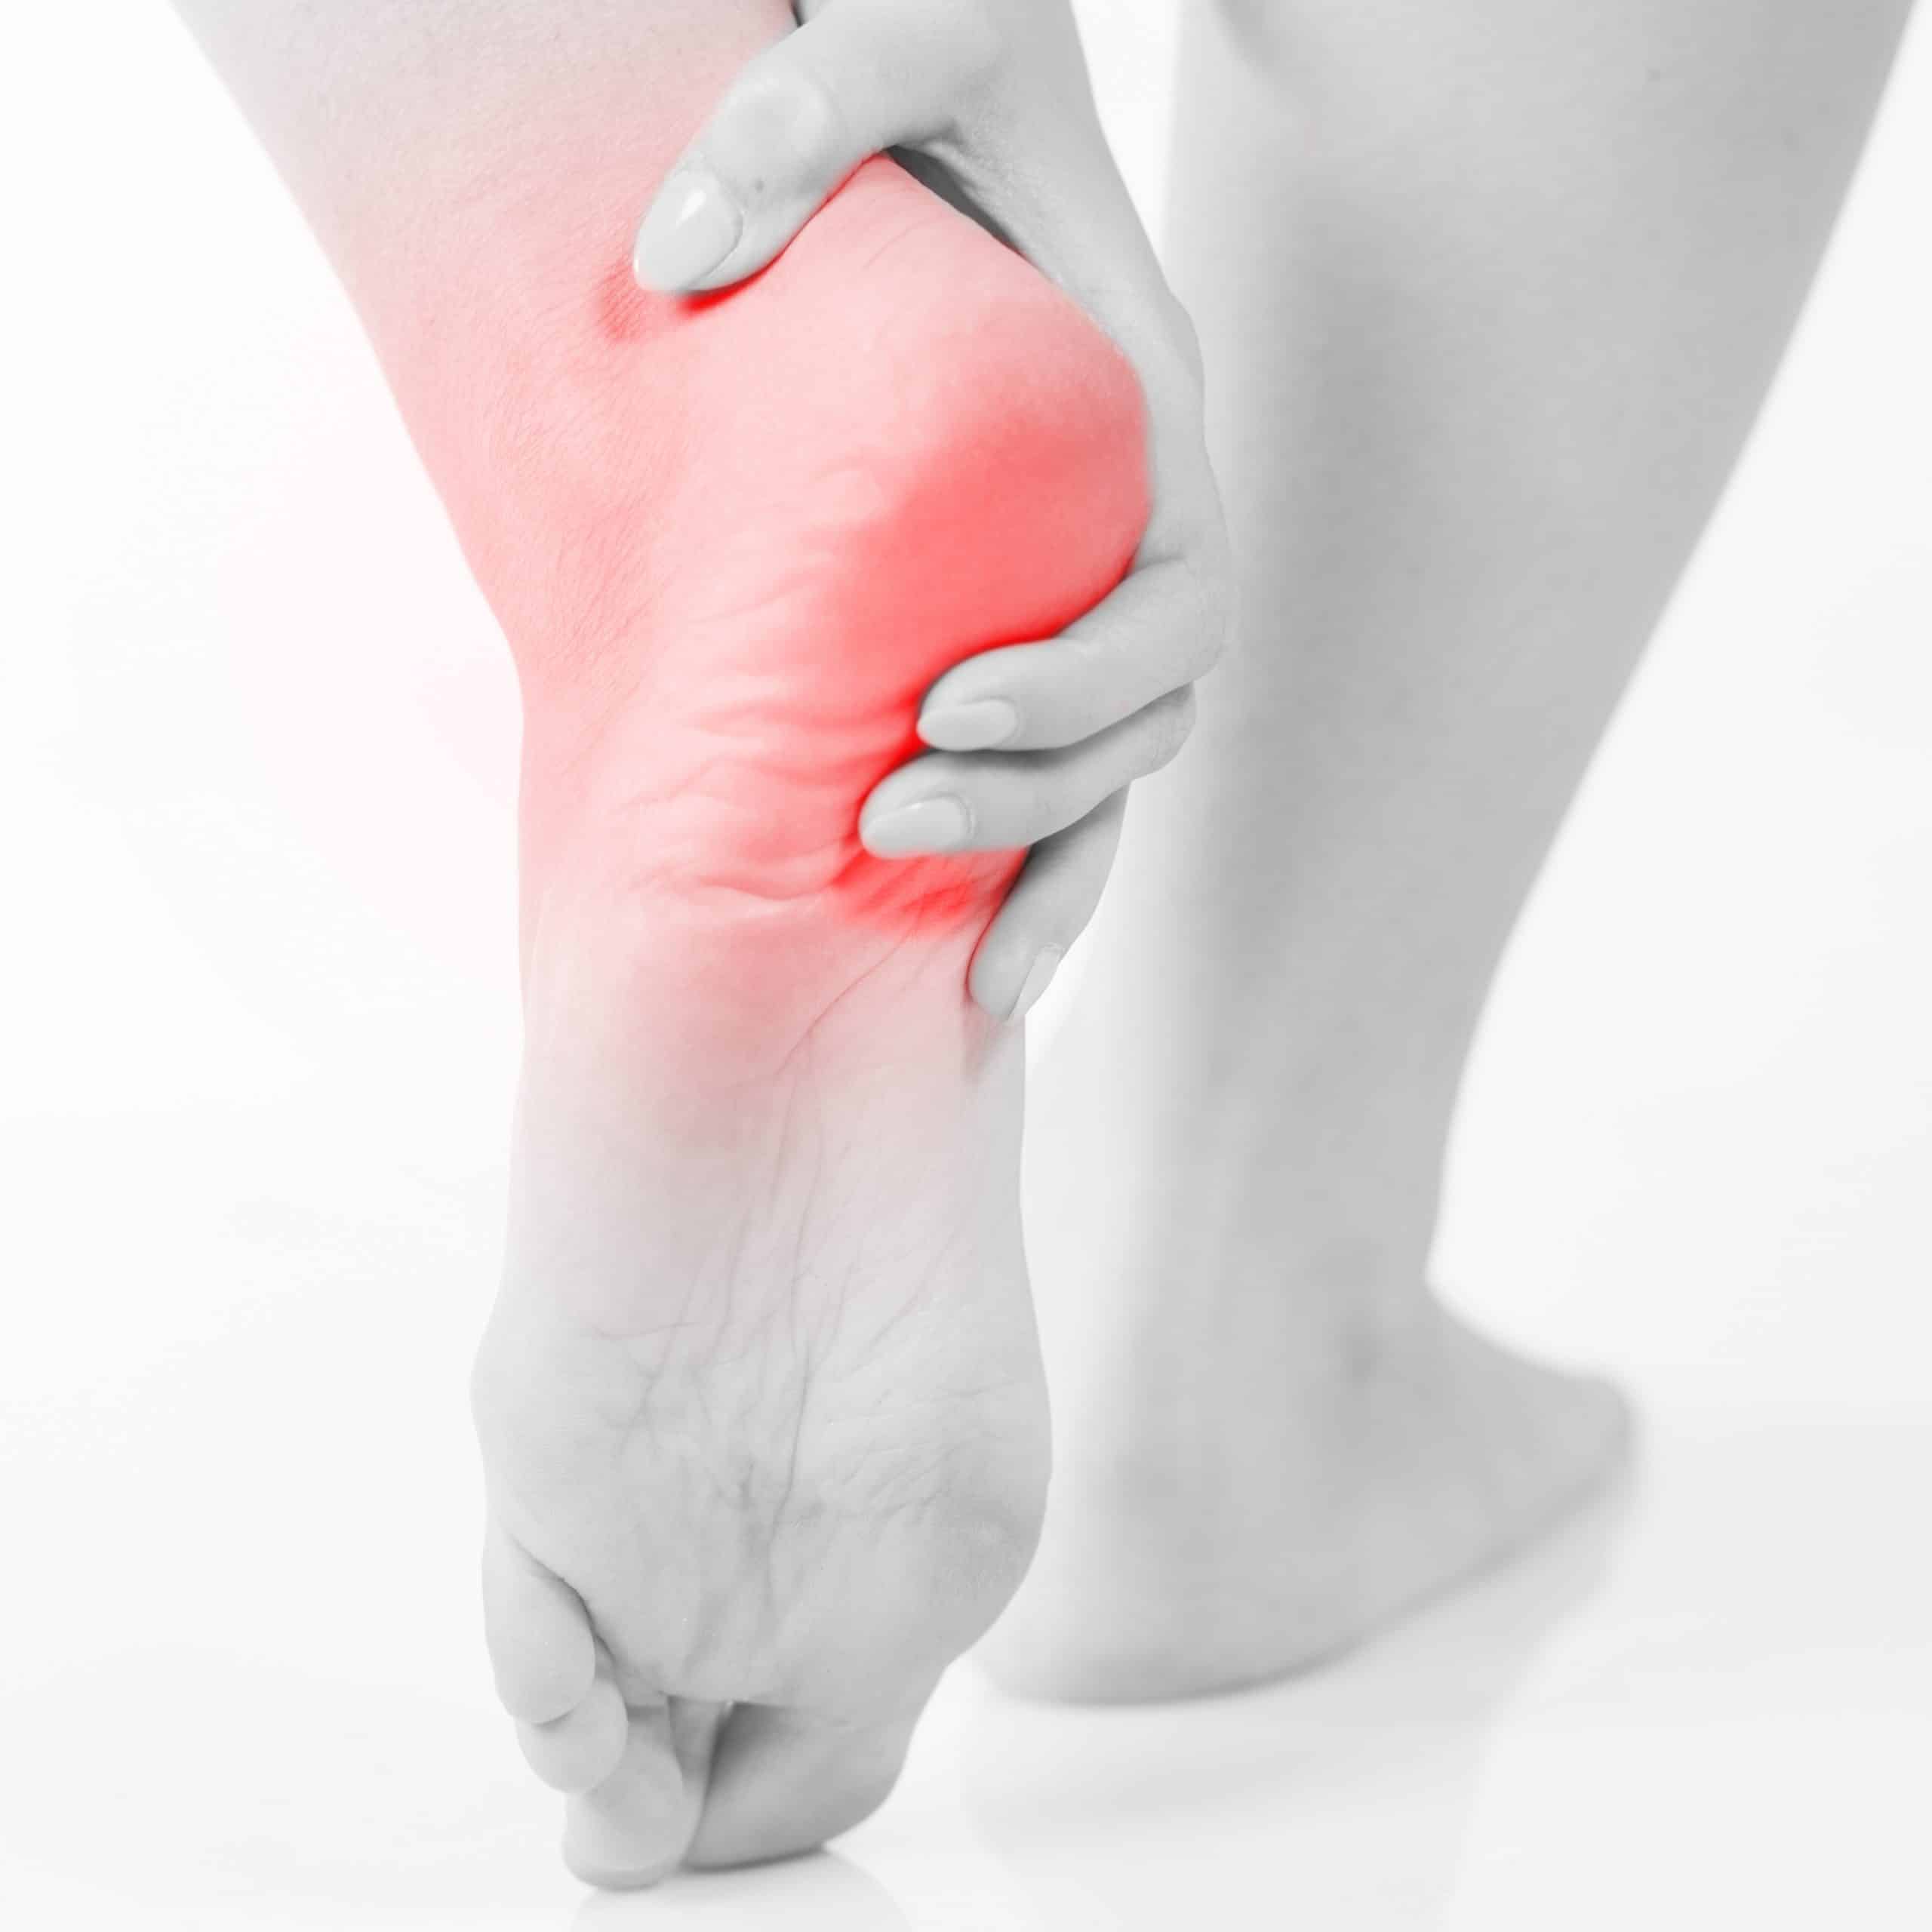 Heel and Ankle Pain